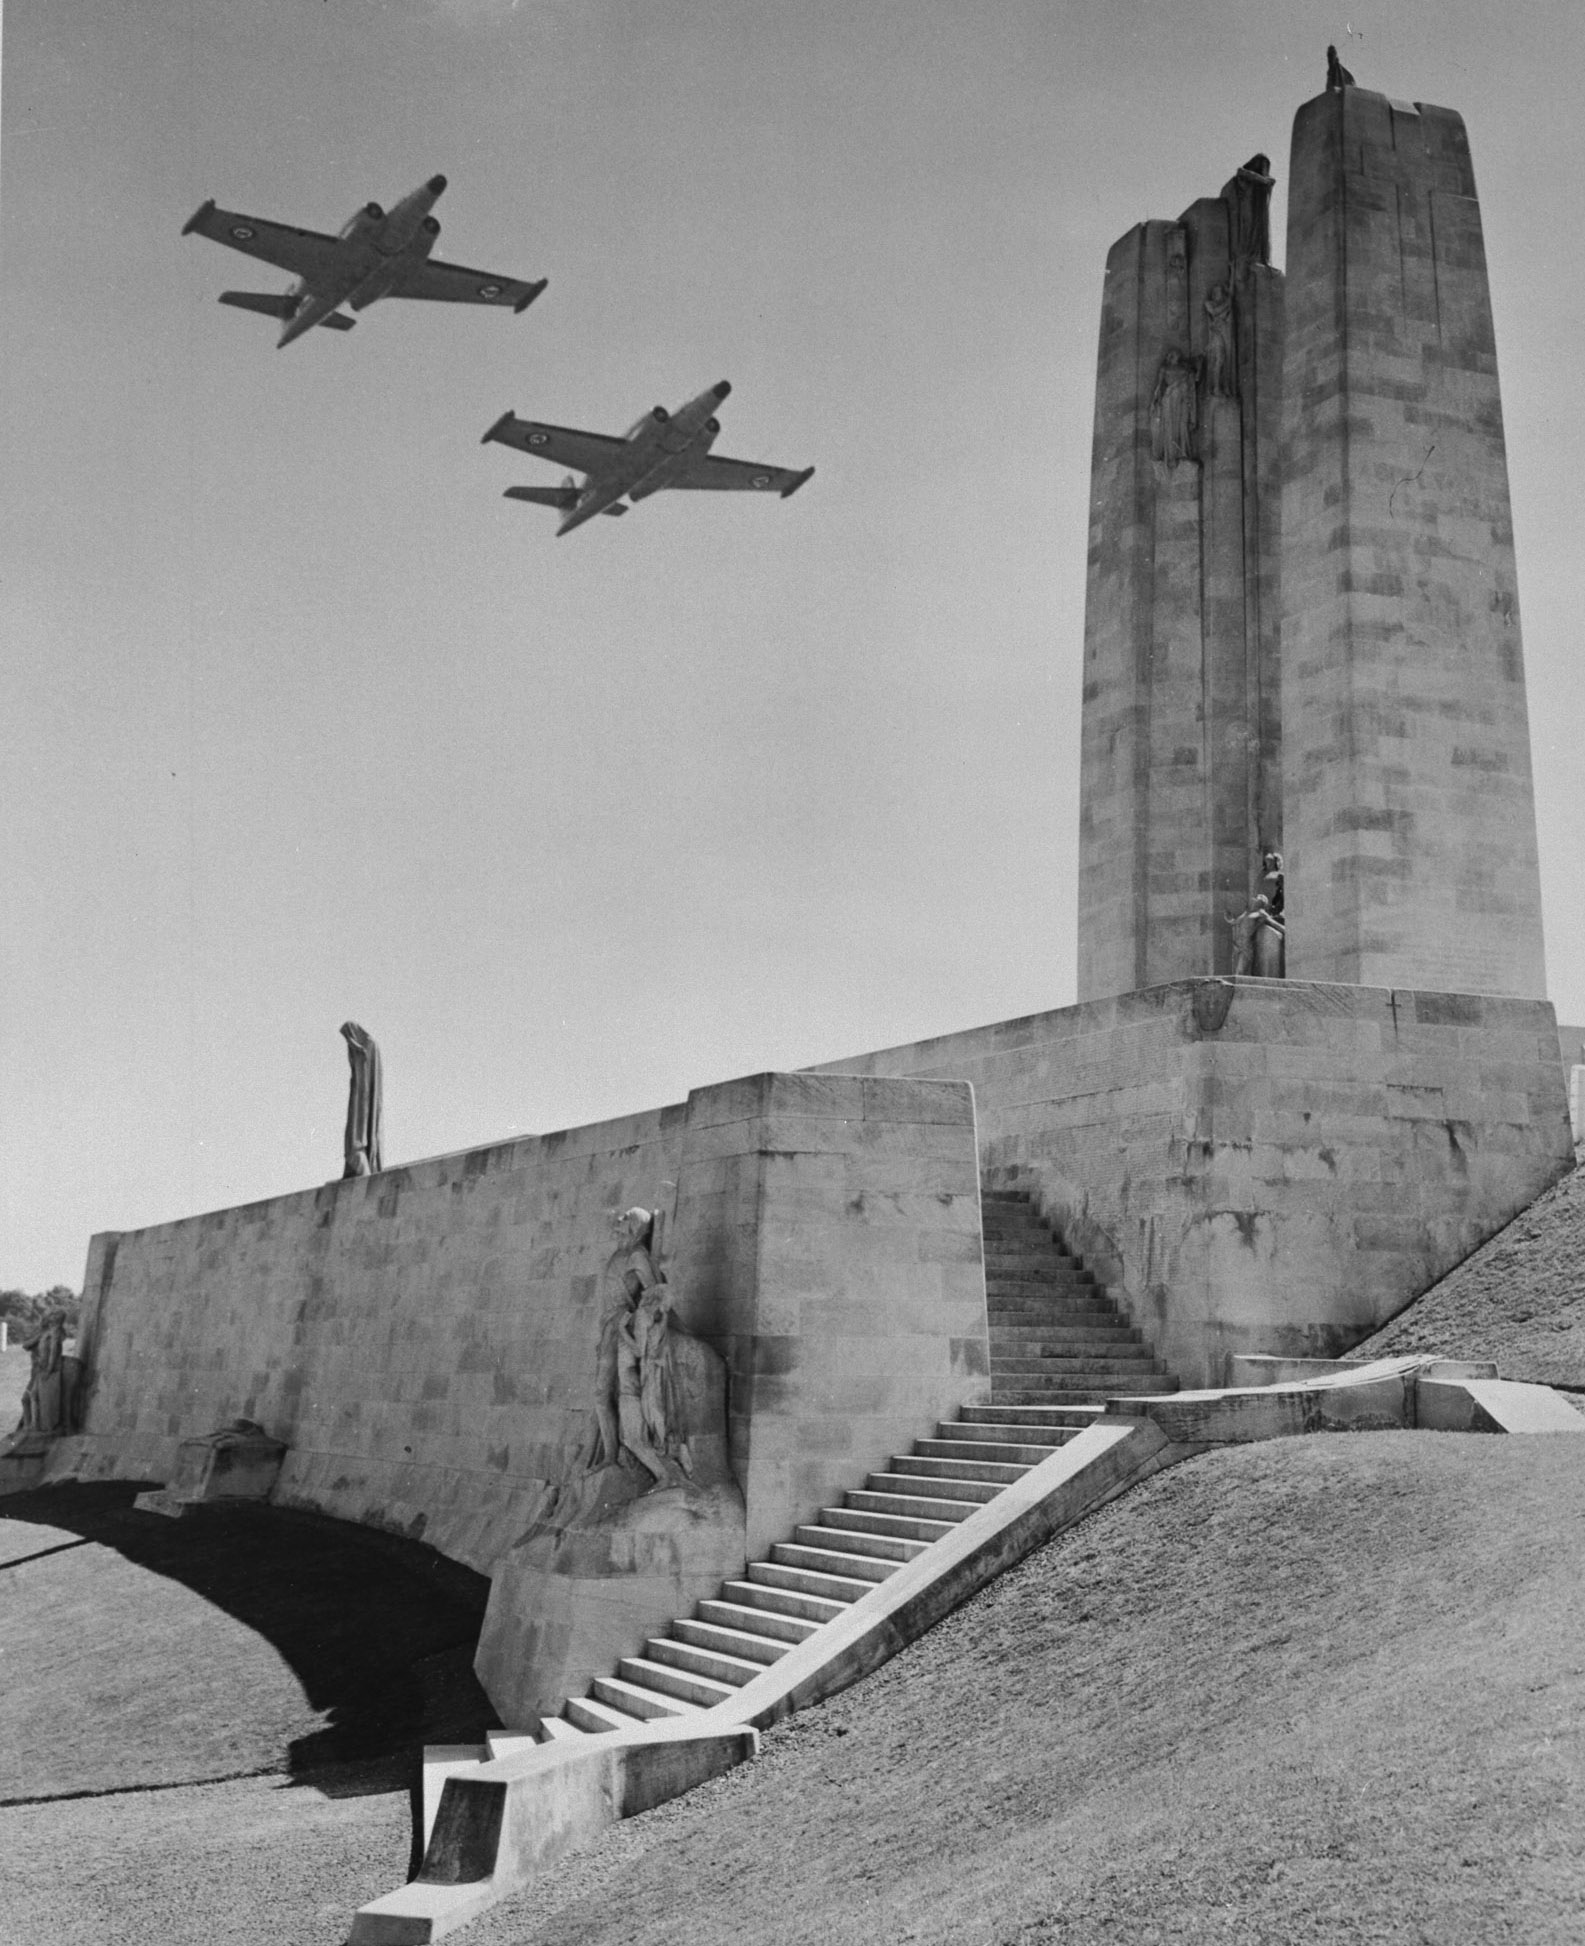 The Royal Flying Corps, which included many Canadian flyers, carries out aerial reconnaissance and photography of enemy positions leading up to the Battle of Vimy Ridge and provided artillery spotting before and during the battle. Several Canadian airmen were killed in the days before and after the battle. In this undated file photo, CF-100 Canucks fly over the Canadian War Memorial at Vimy Ridge in France. PHOTO: PL-122793, DND Archives